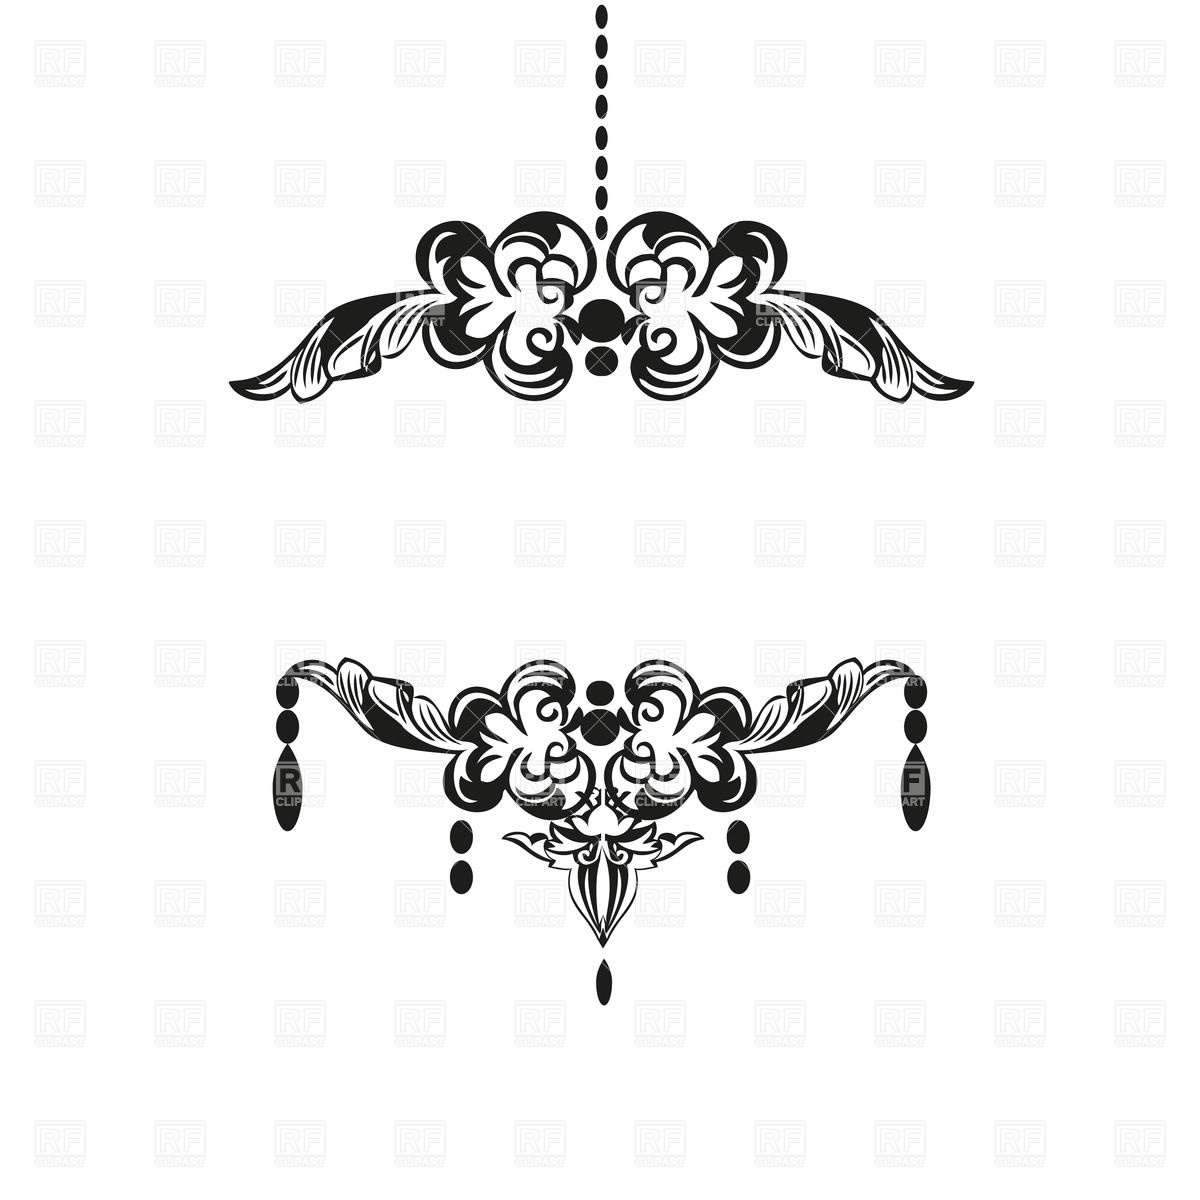     Chandelier Silhouette 23925 Download Royalty Free Vector Clipart